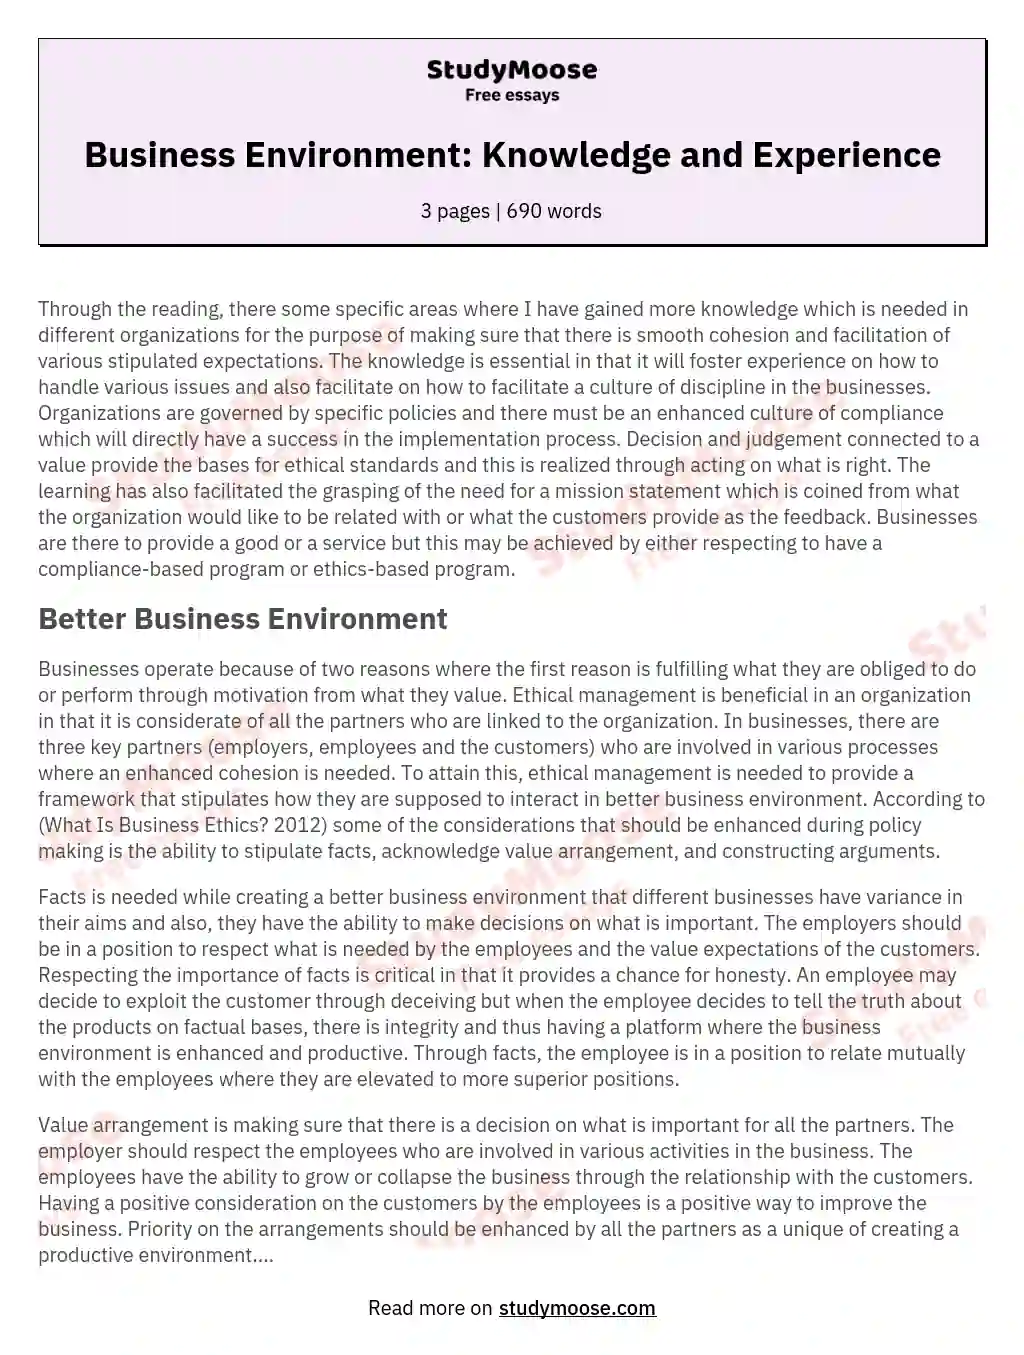 Business Environment: Knowledge and Experience essay